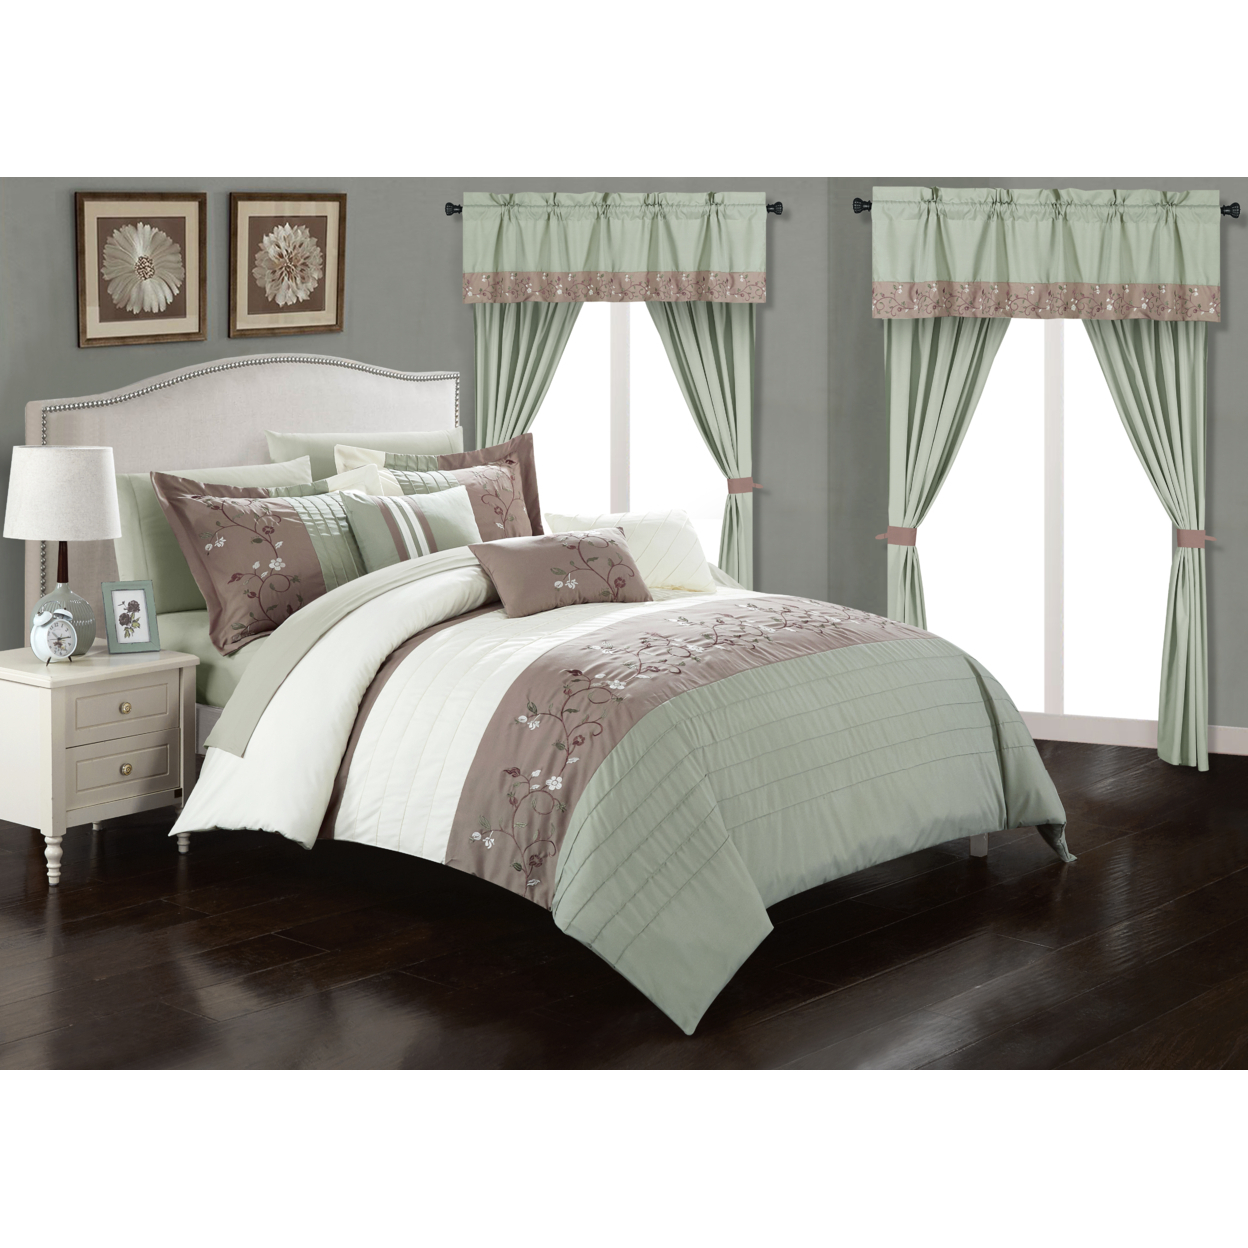 Buy Sonita 20-Piece Bedding Set With Comforter, Sheets & Curtains, Mult ...